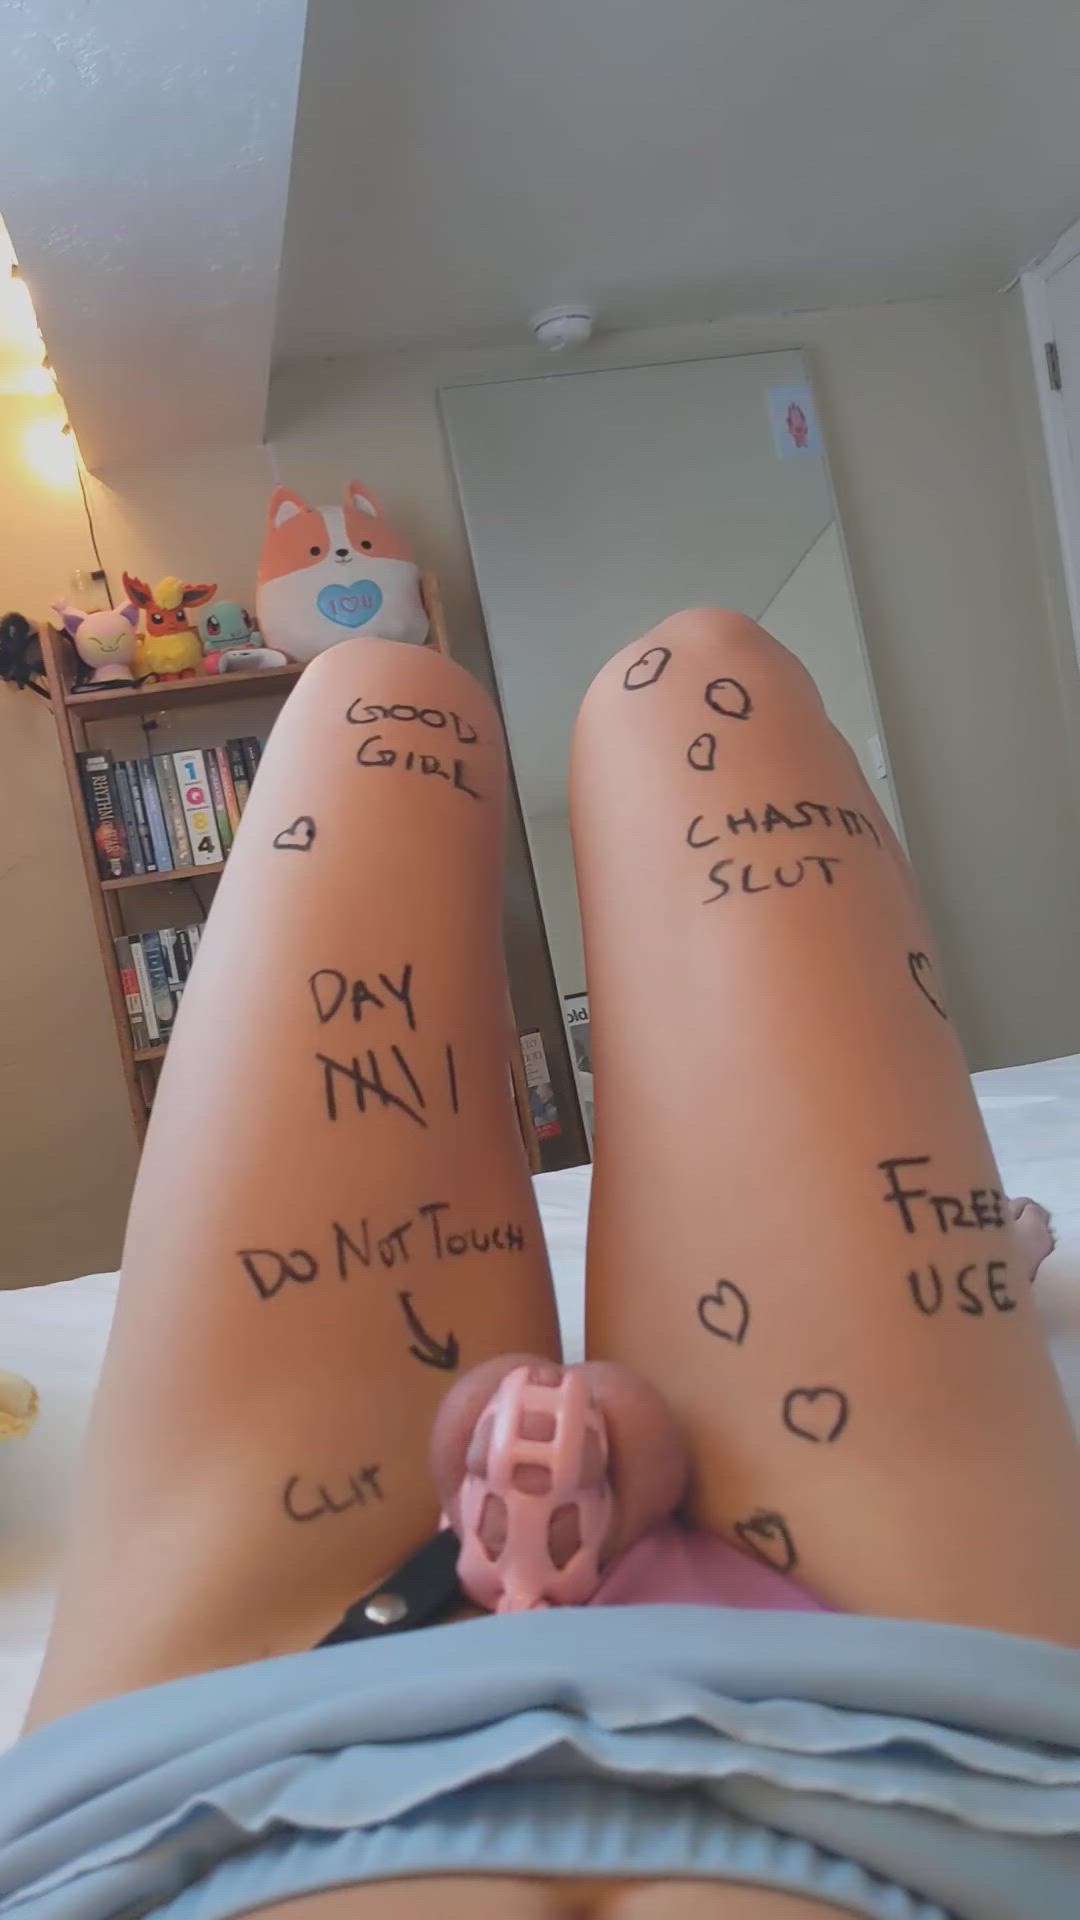 Femboy porn video with onlyfans model dandeliongirlx <strong>@dandeliongirlx</strong>